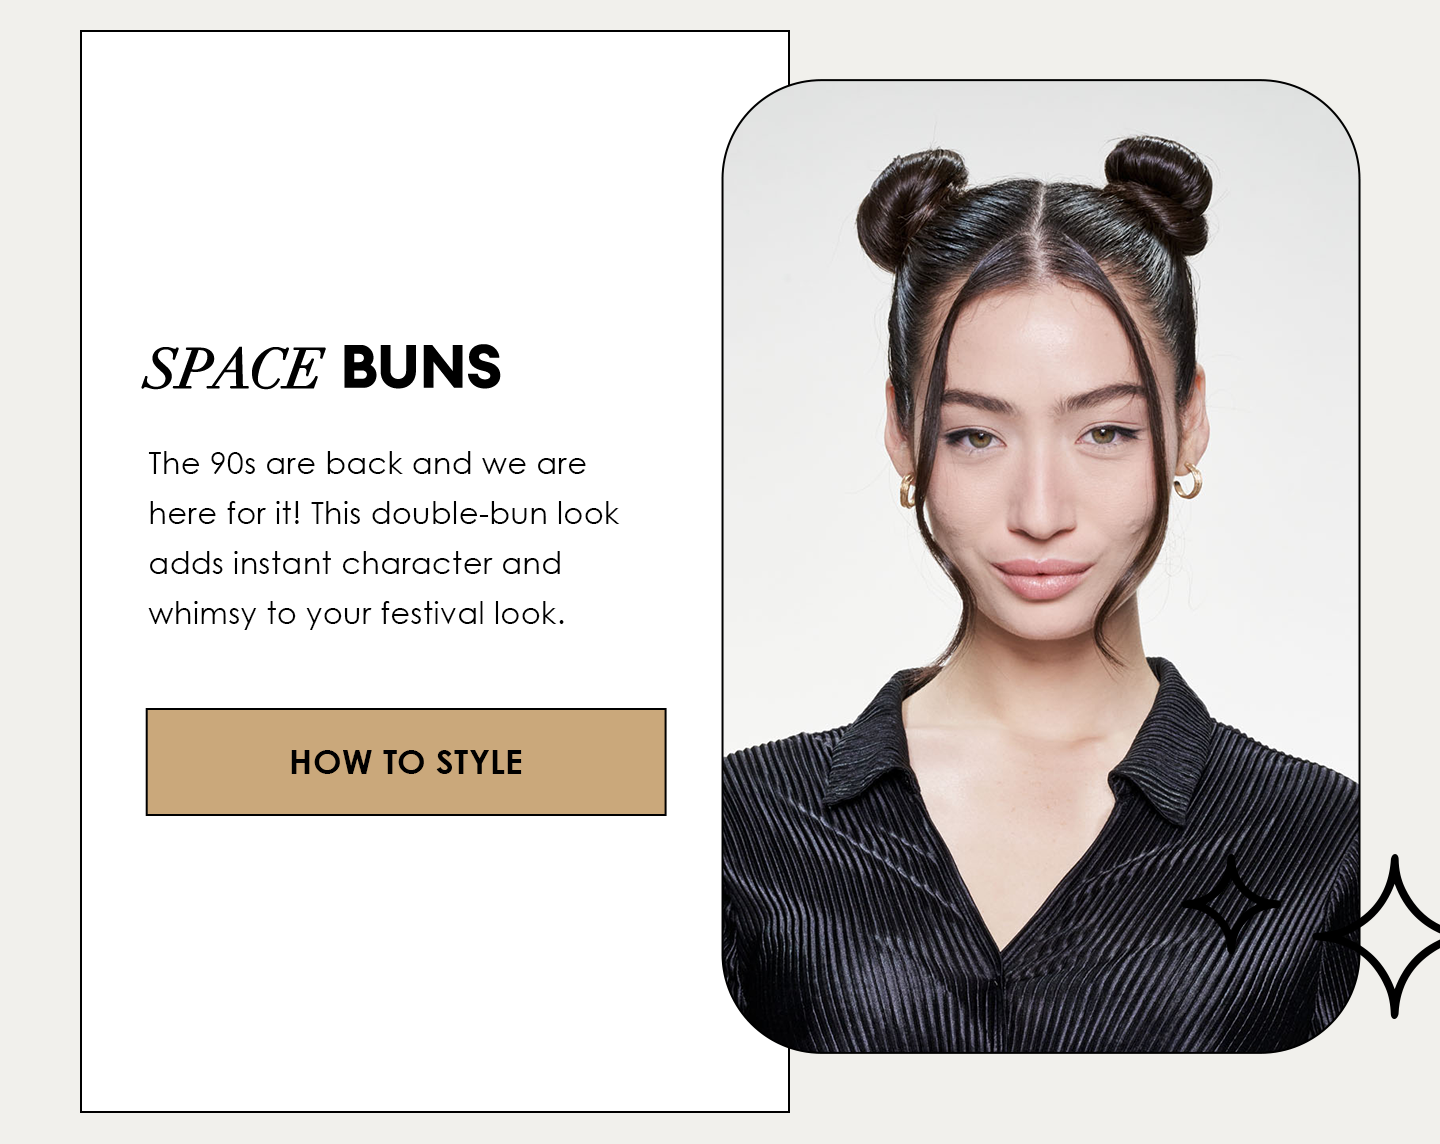 SPACE BUNS | The 90s are back and we are here for it! This double-bun look adds instant character and whimsy to your festival look. | HOW TO STYLE